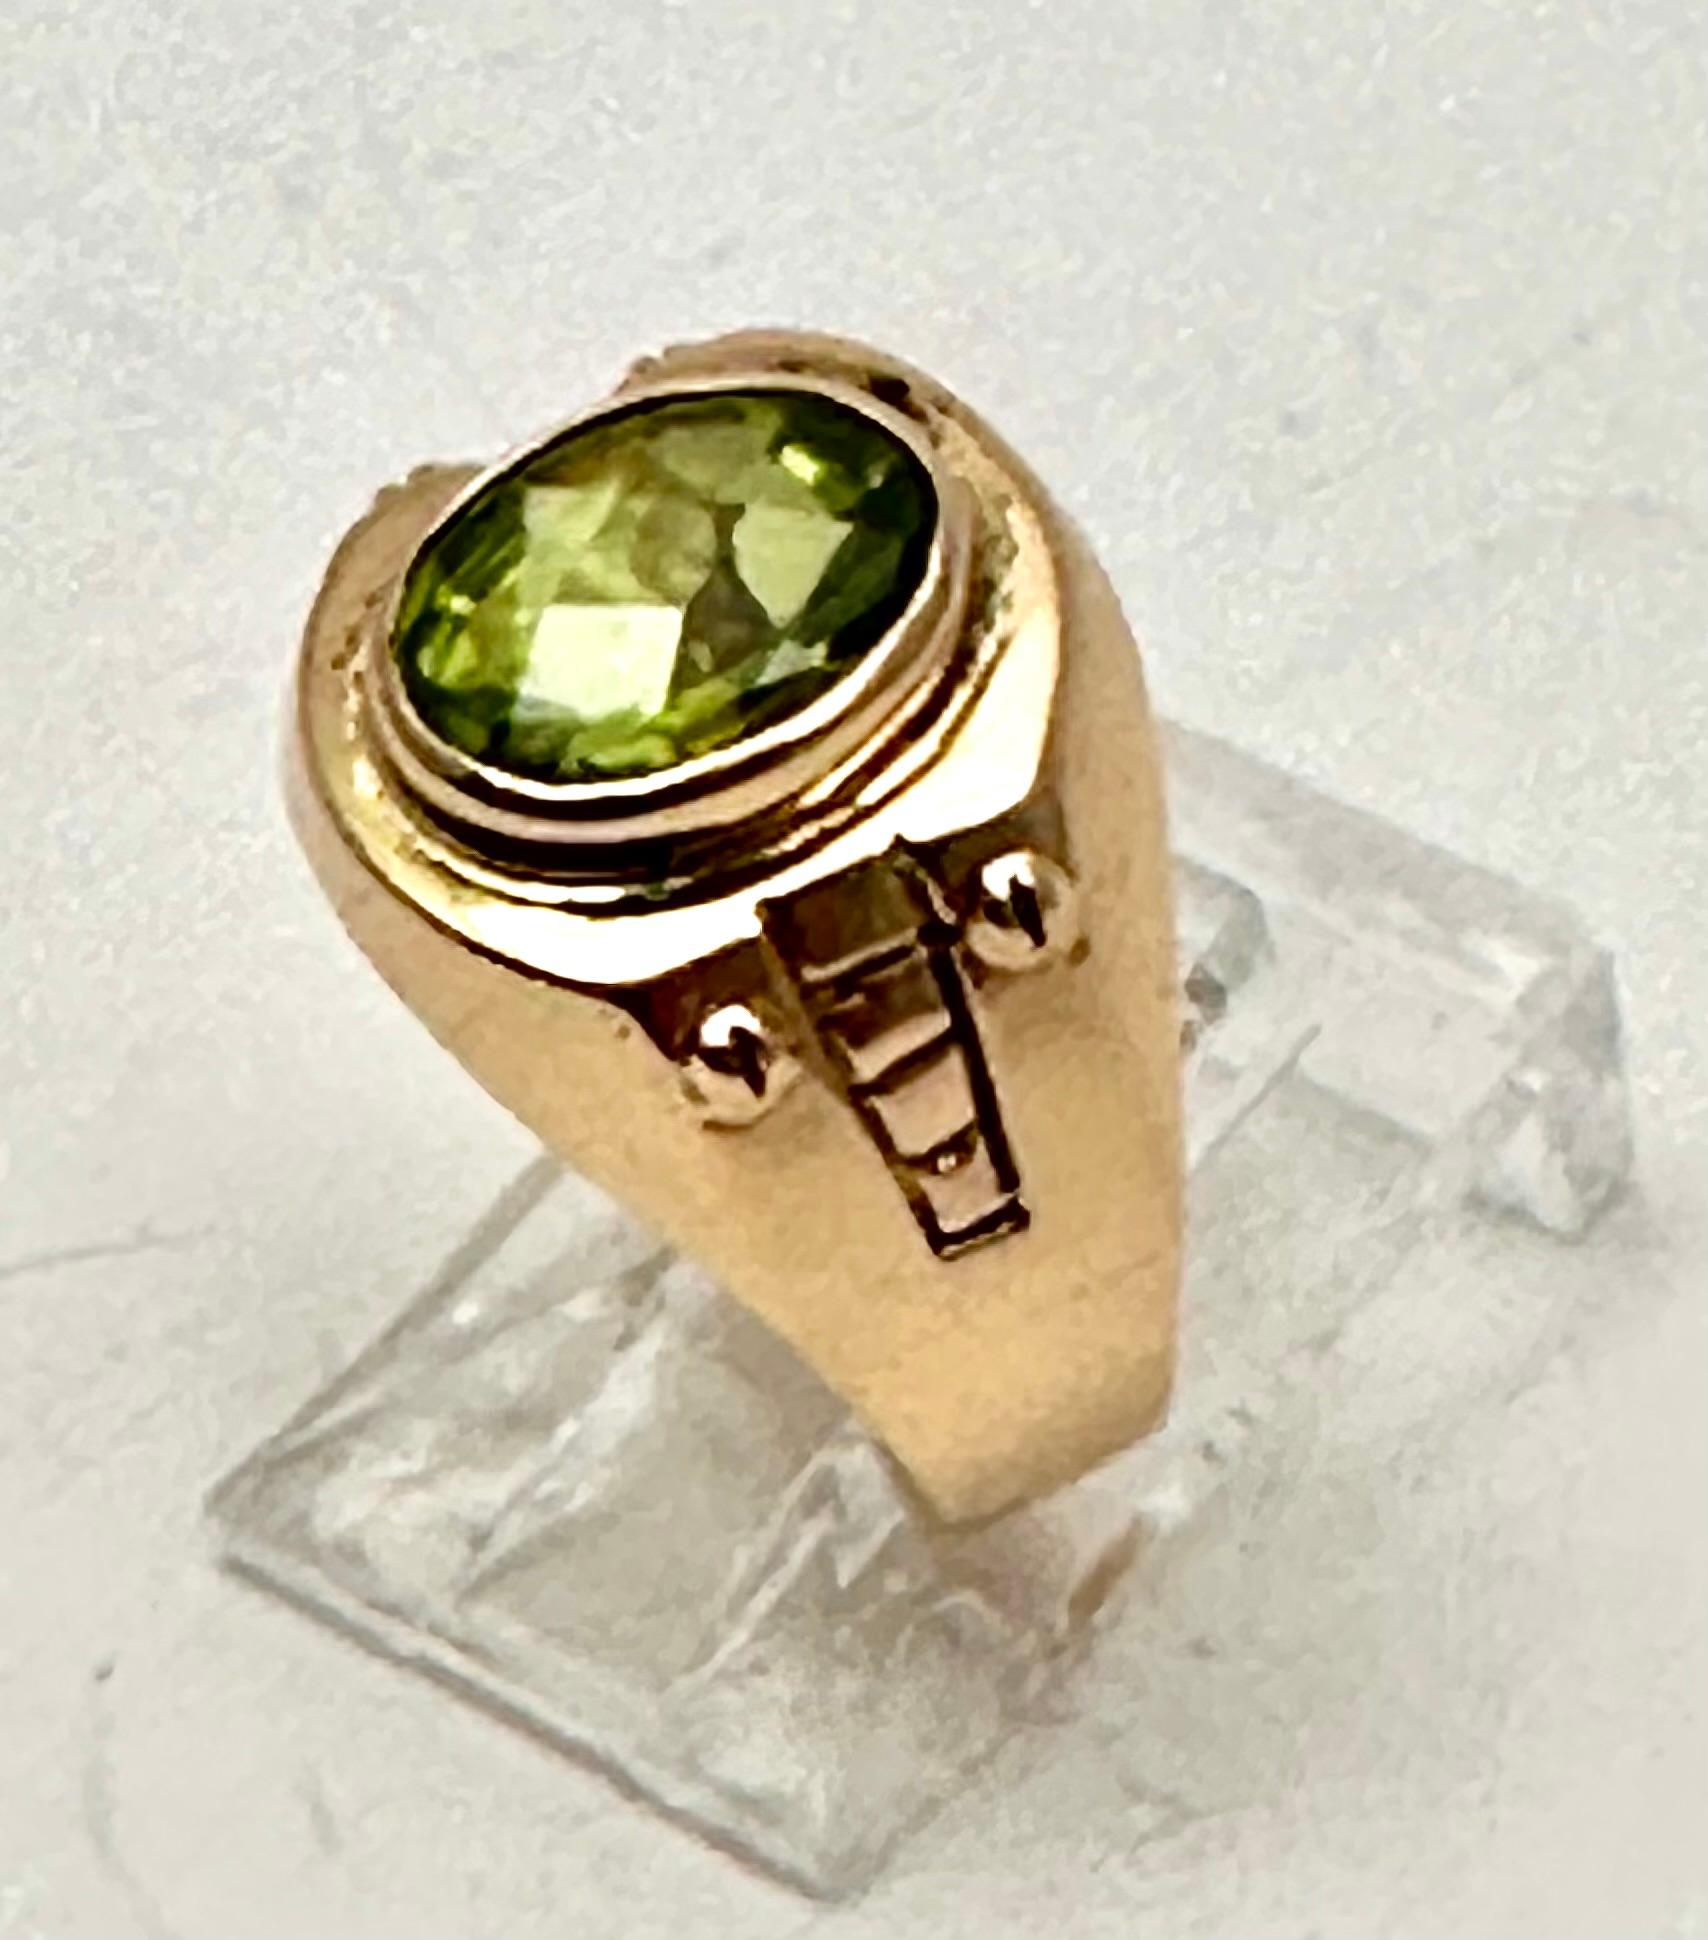 Women's or Men's 21kt Yellow Gold 8mm x 9mm Oval Peridot Ring Size 5 3/4 For Sale